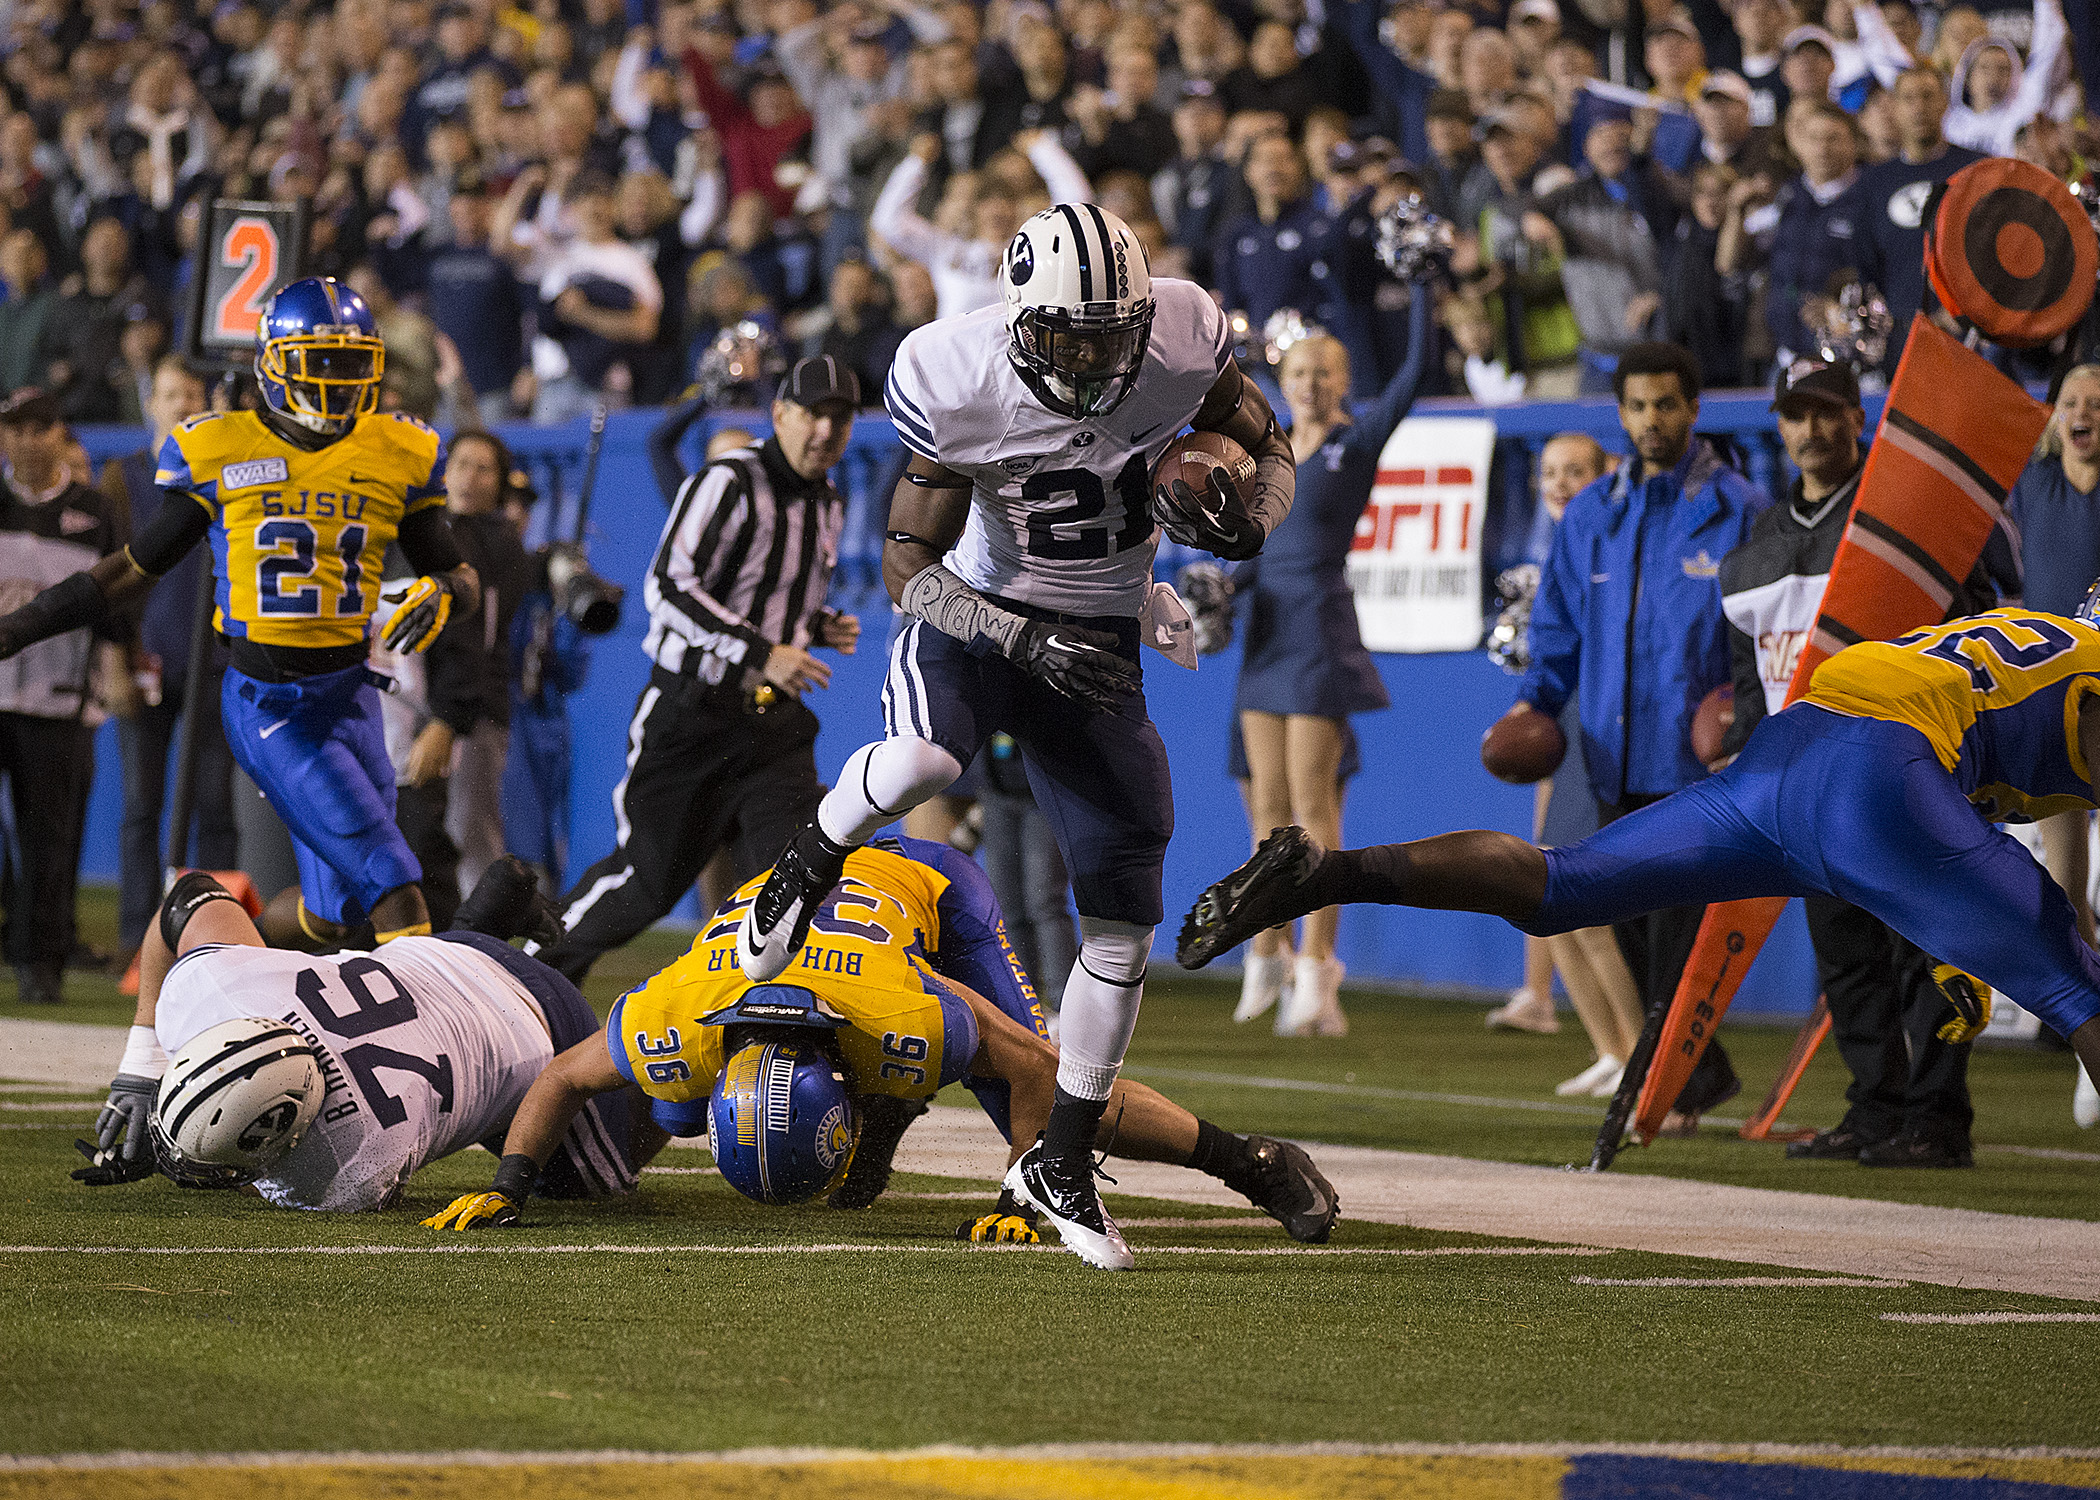 Jamaal Williams rushes for a touchdown against San Jose State on Saturday.